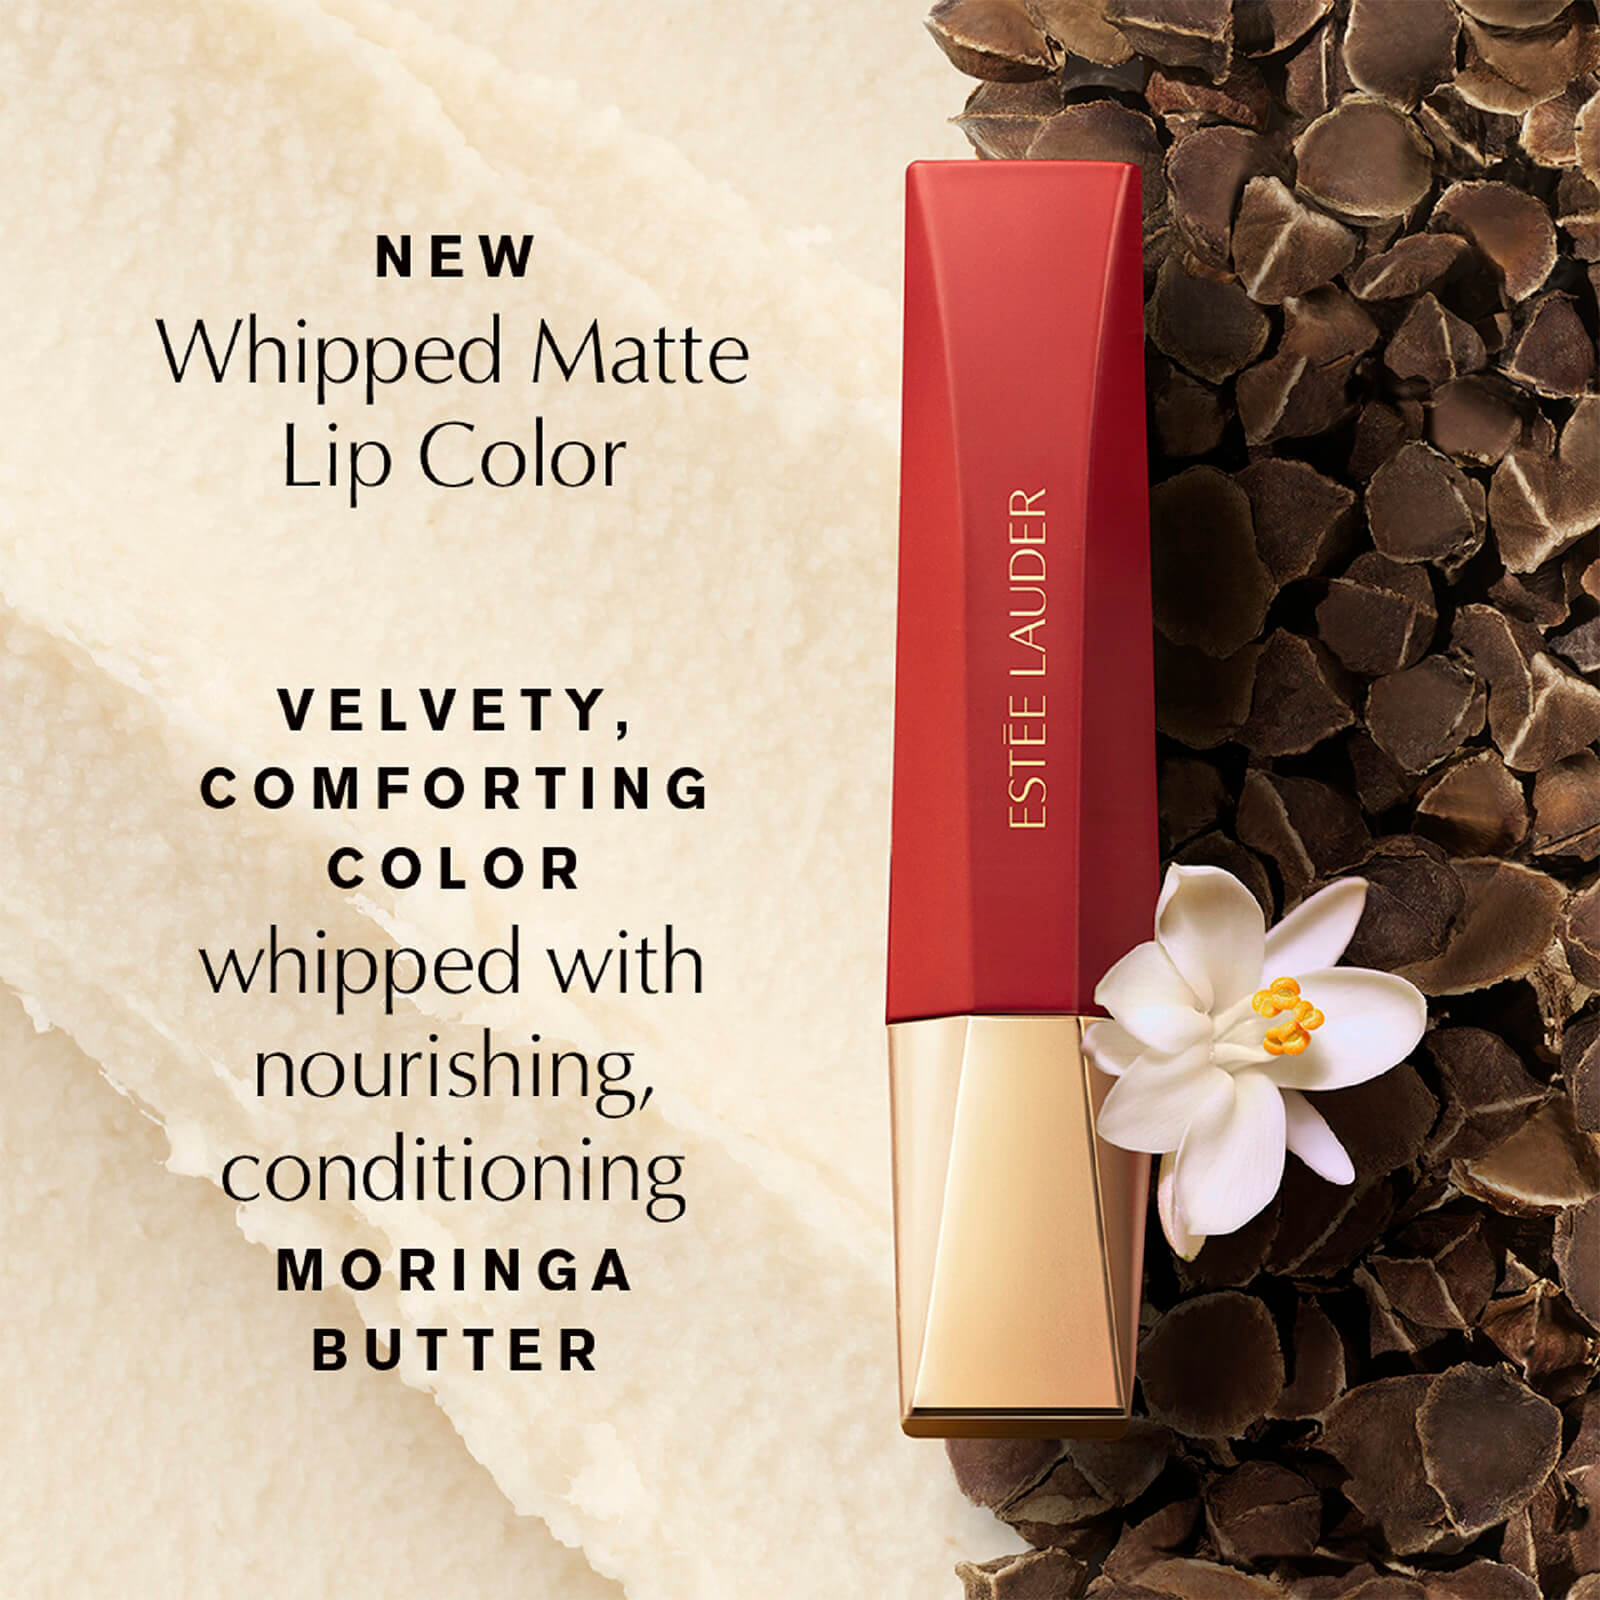 New whipped matte lip color. Velvety, comforting color whipped with nourishing, conditioning moringa butter